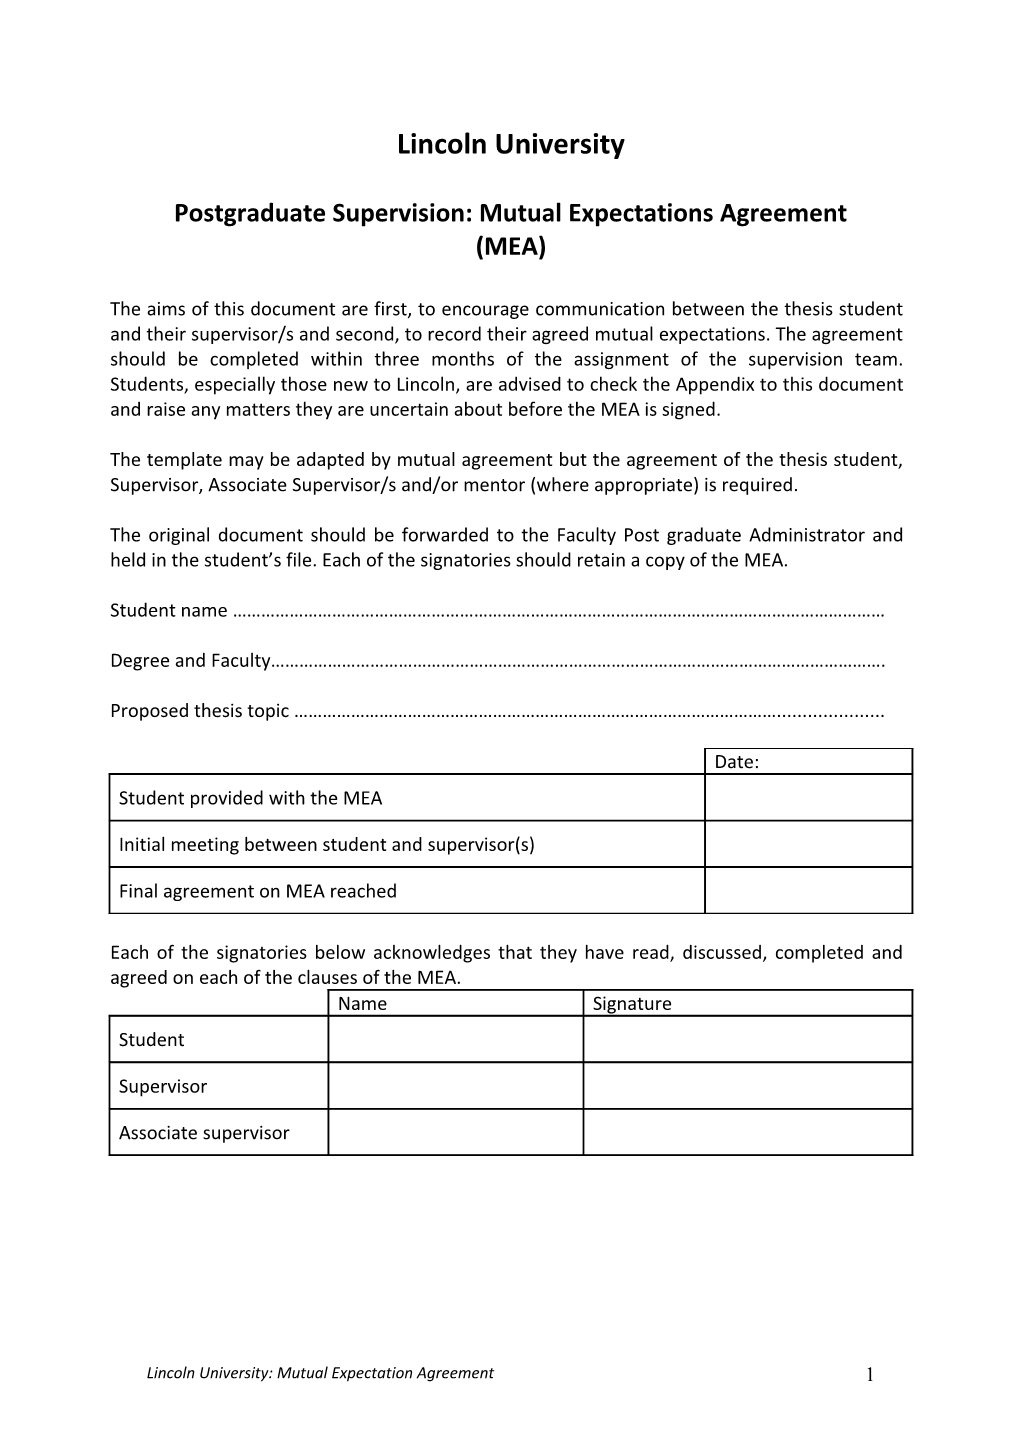 Postgraduate Supervision: Mutual Expectations Agreement (MEA)